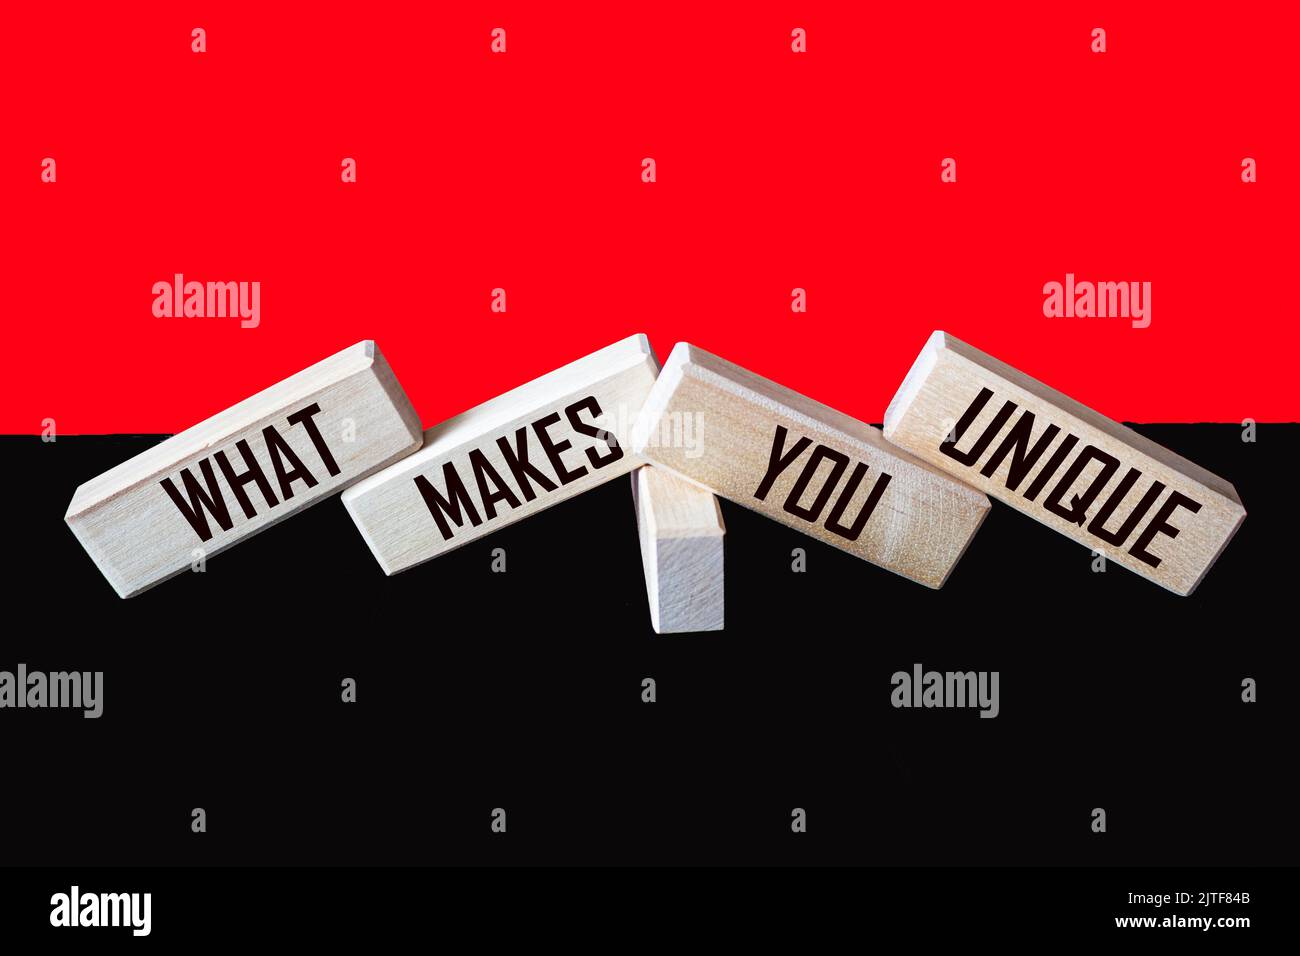 What Makes You Unique written on wooden blocks and red and black background Stock Photo